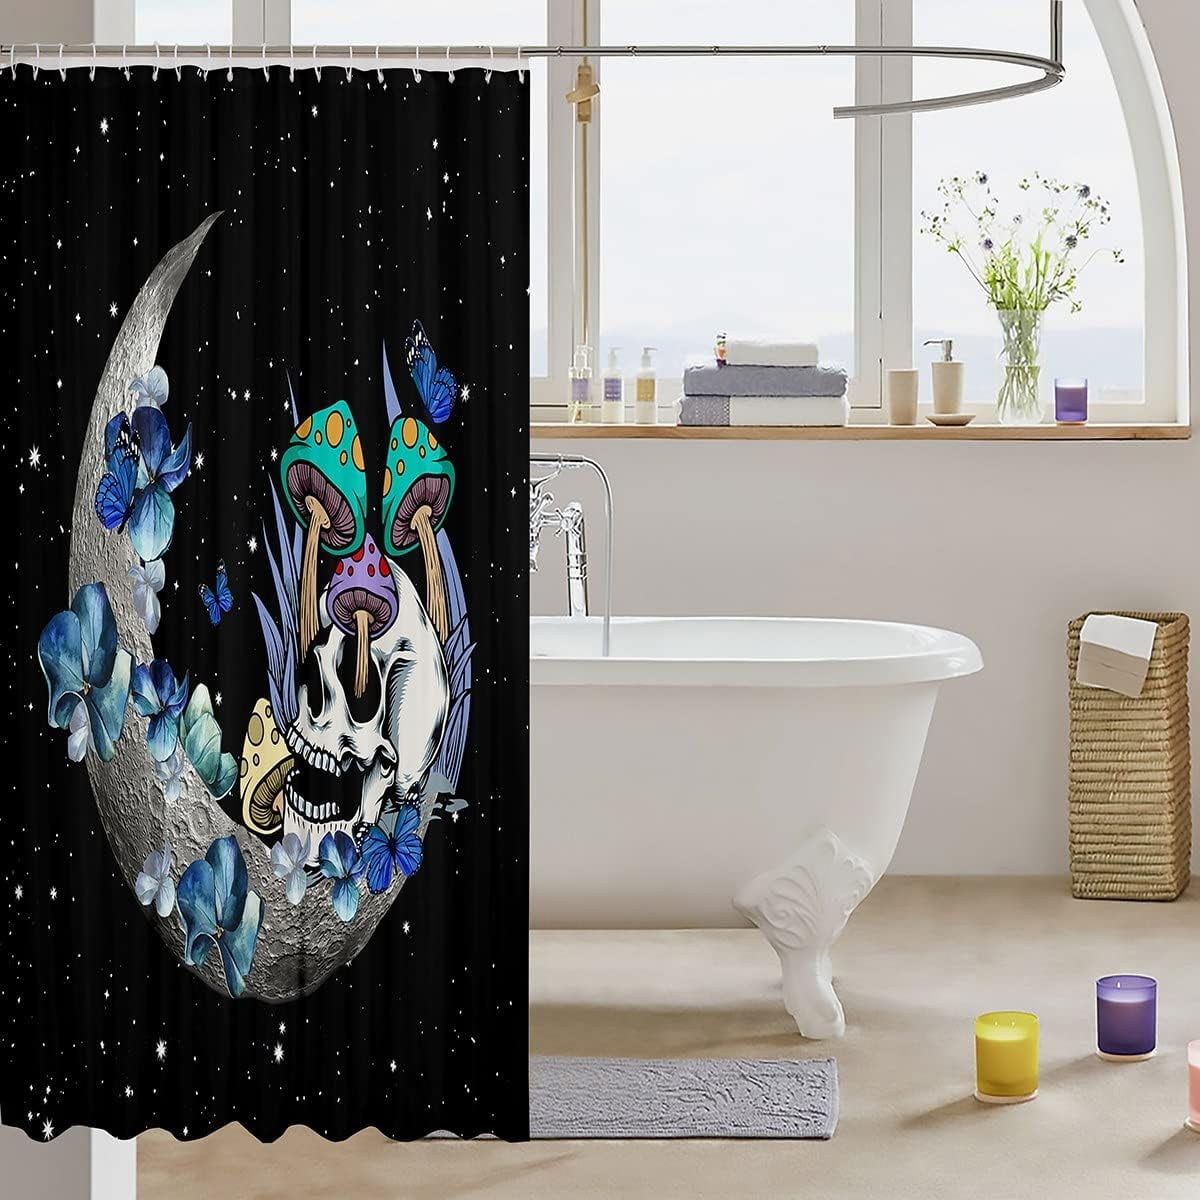 Shower Curtains with Fairytale Mushroom House – Shower of Curtains